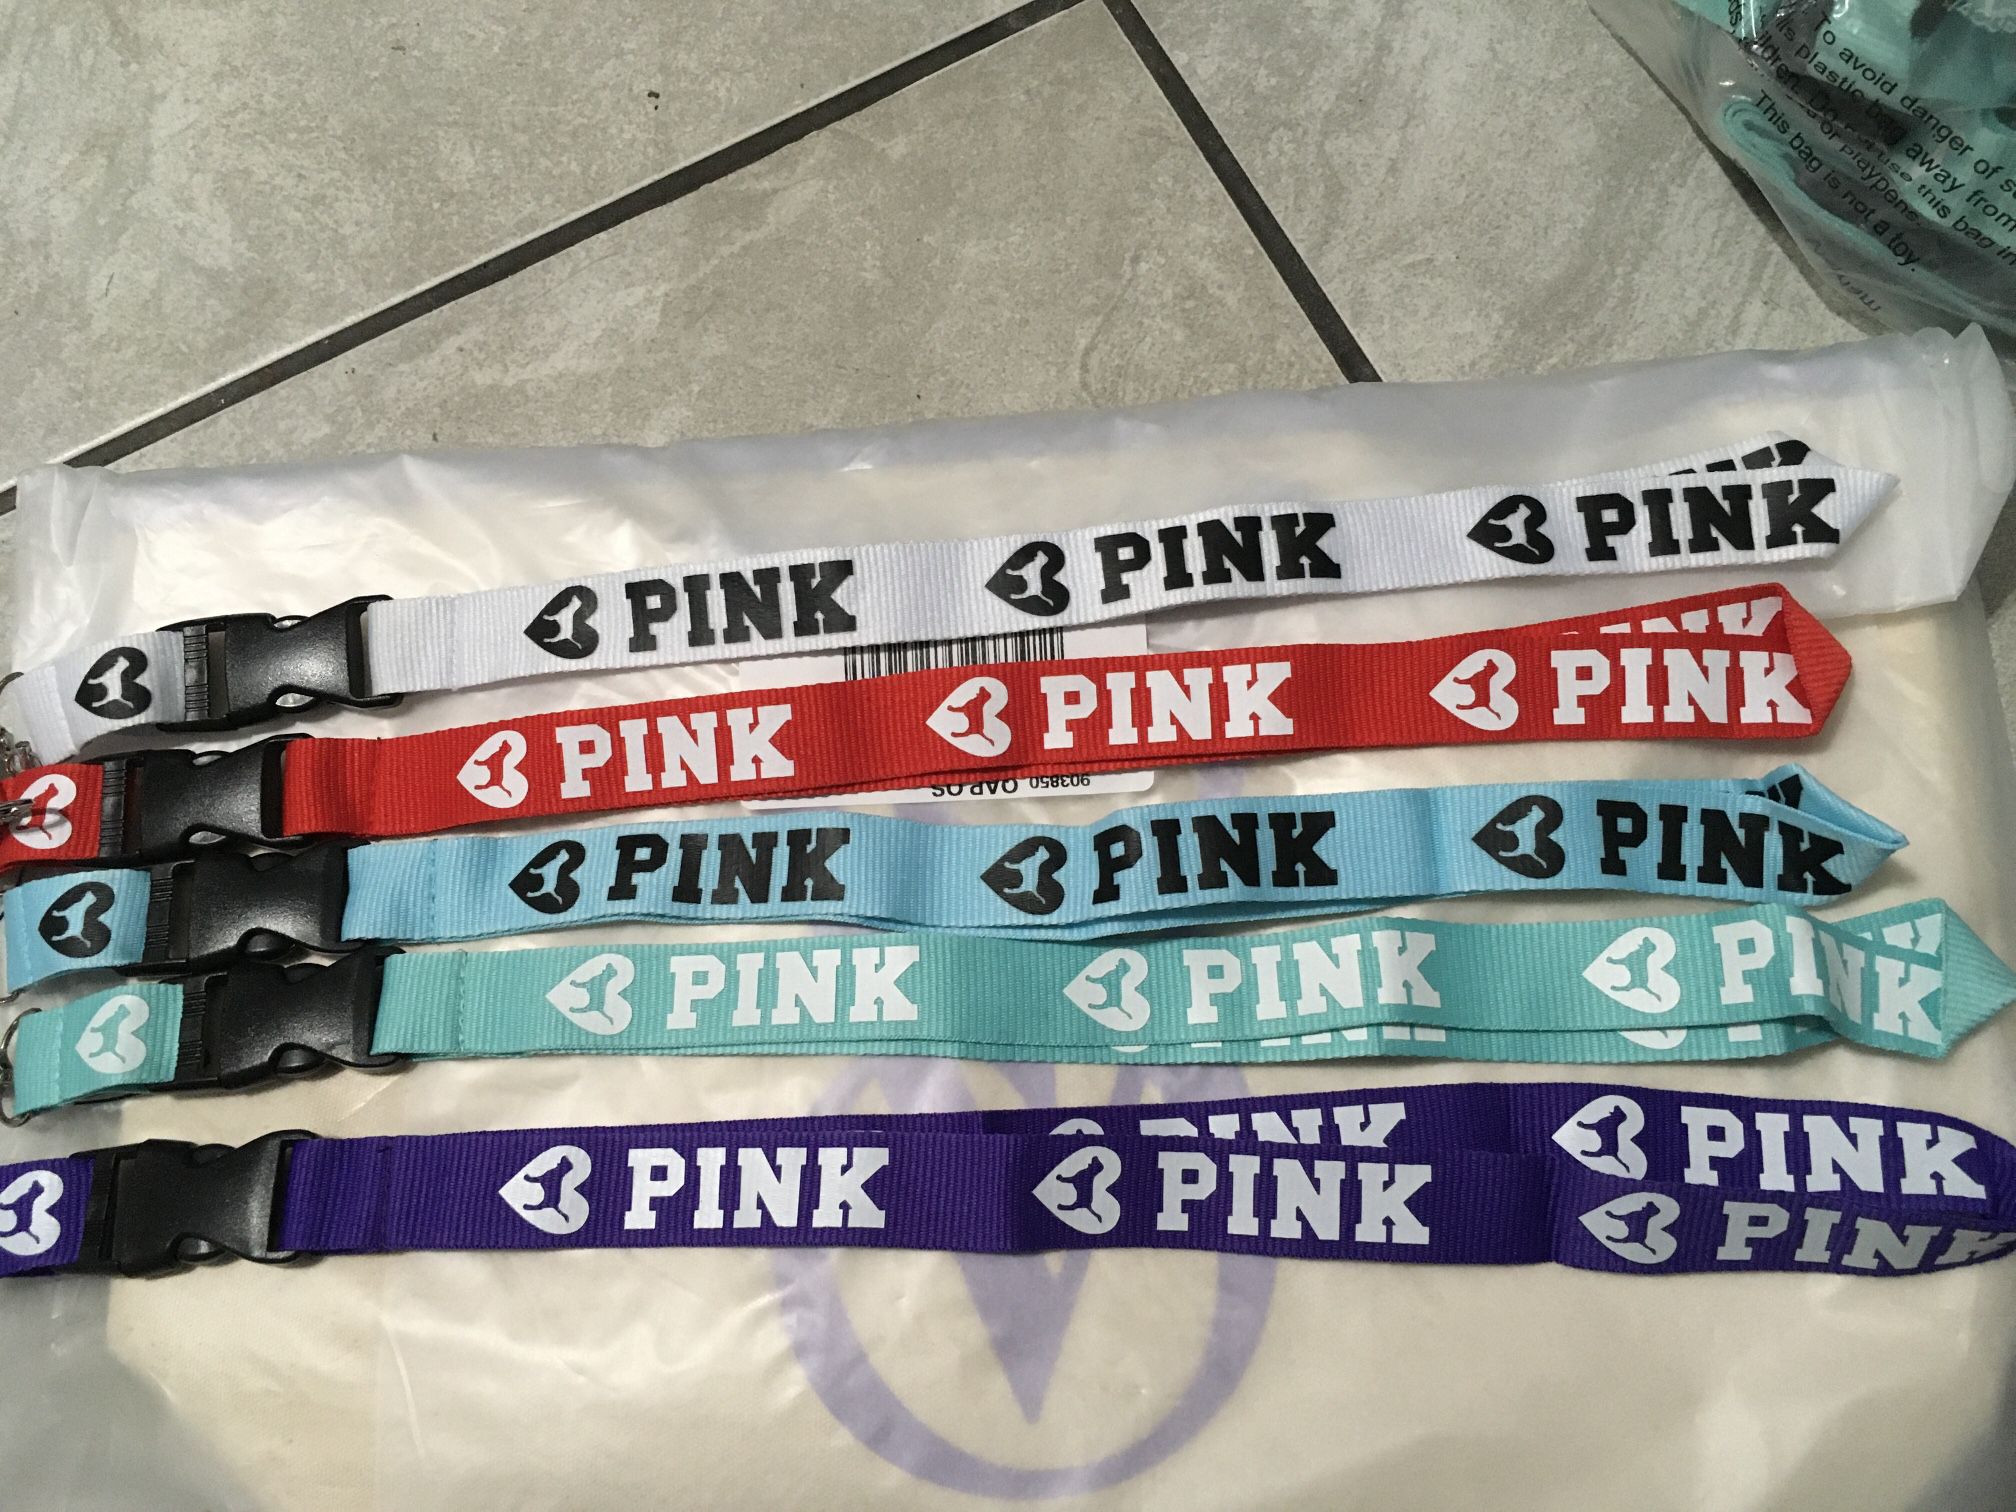 New PINK Lanyards $5 Each Victoria Secret Keychain …check Out My Profile 